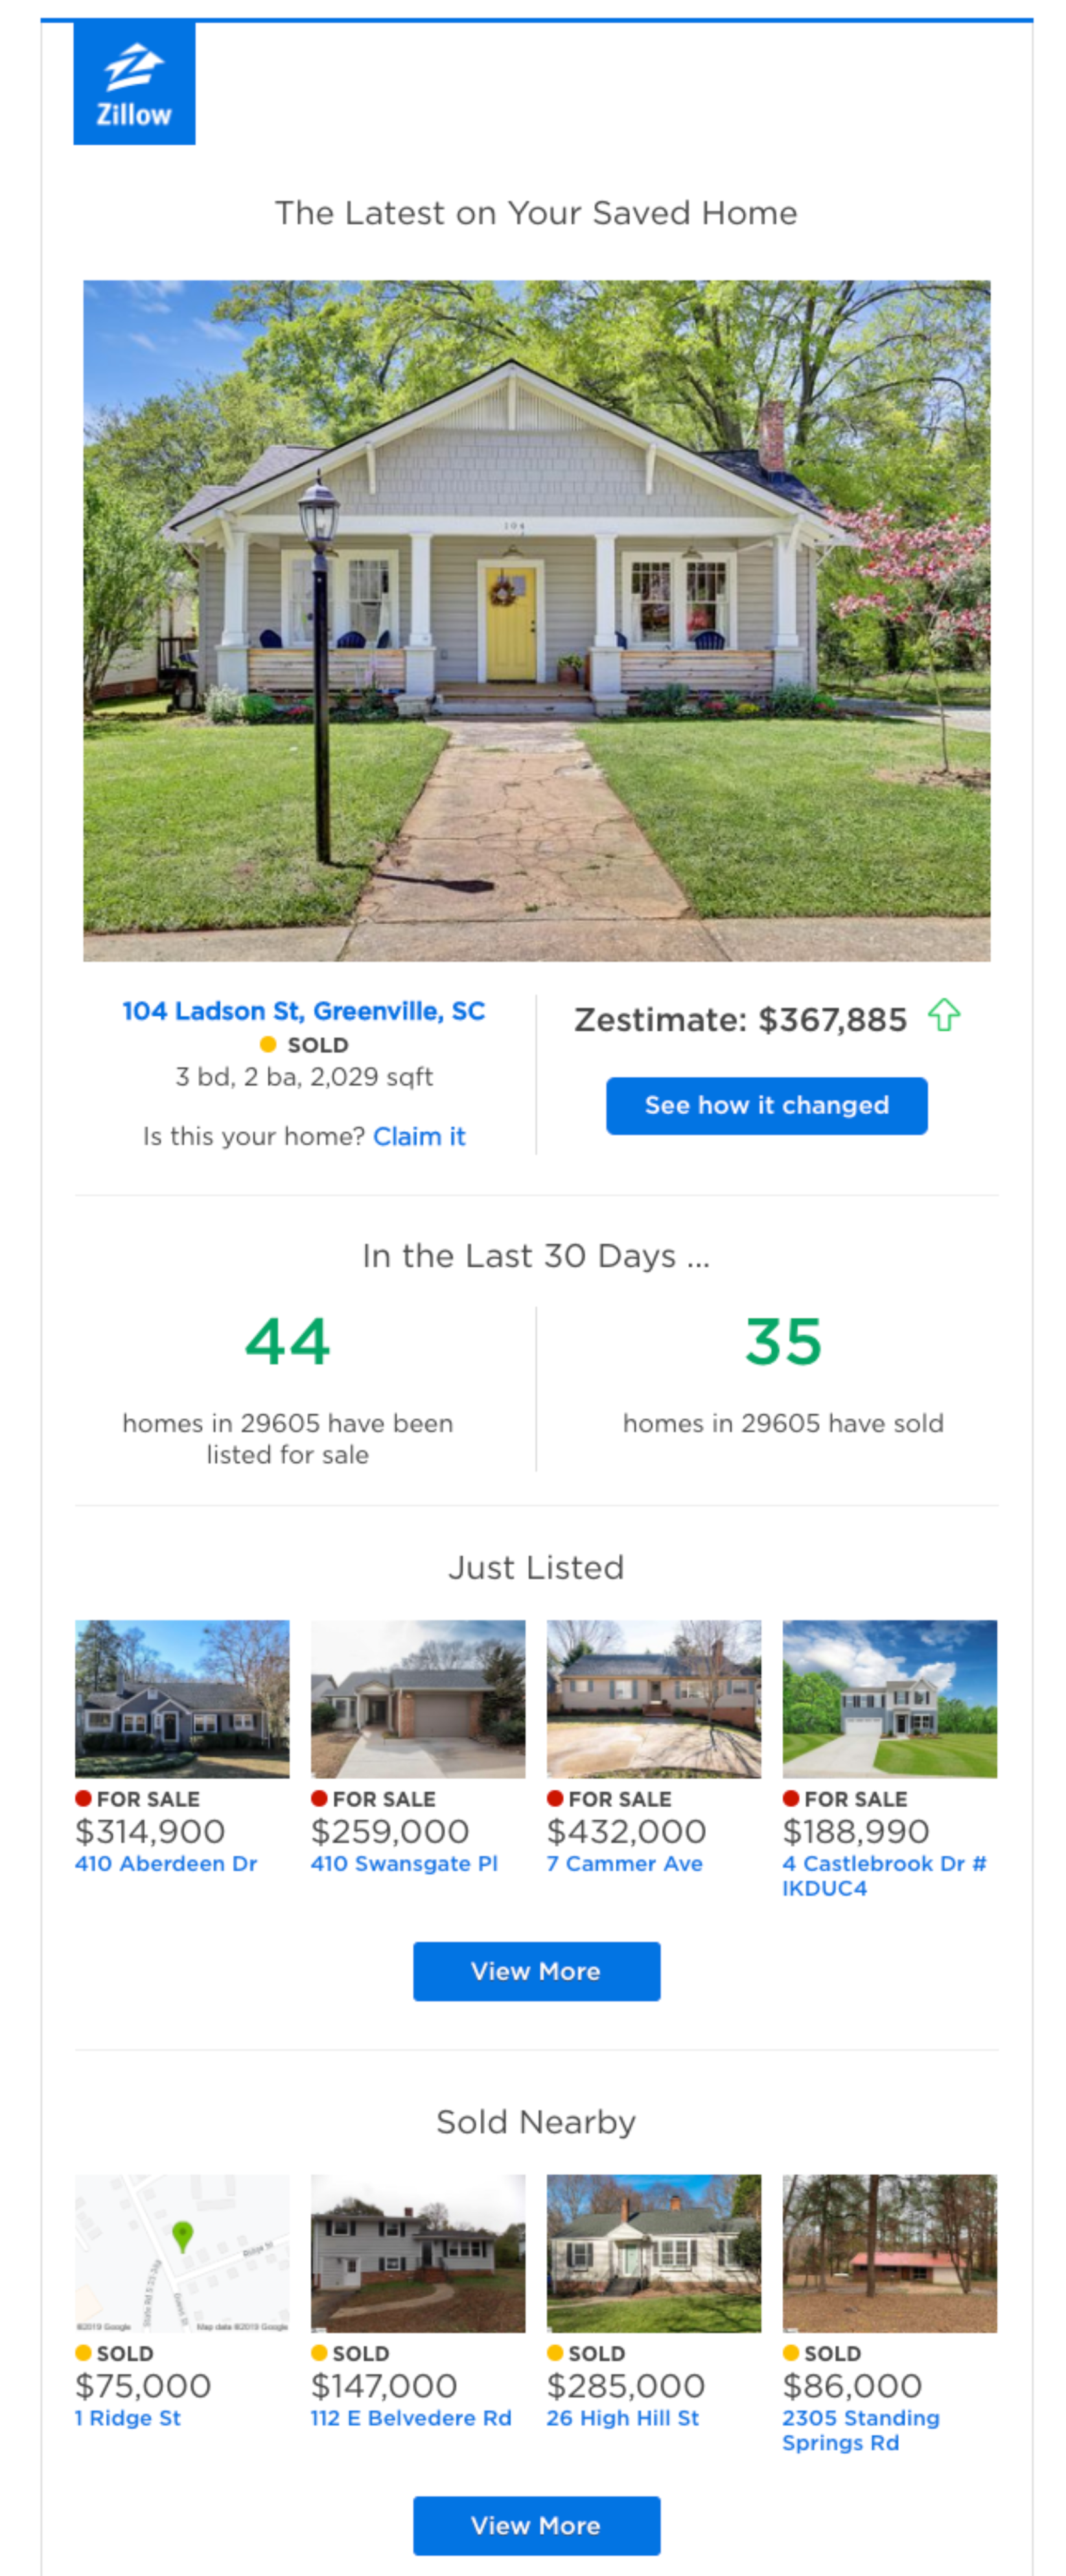 Zillow promotional campaign